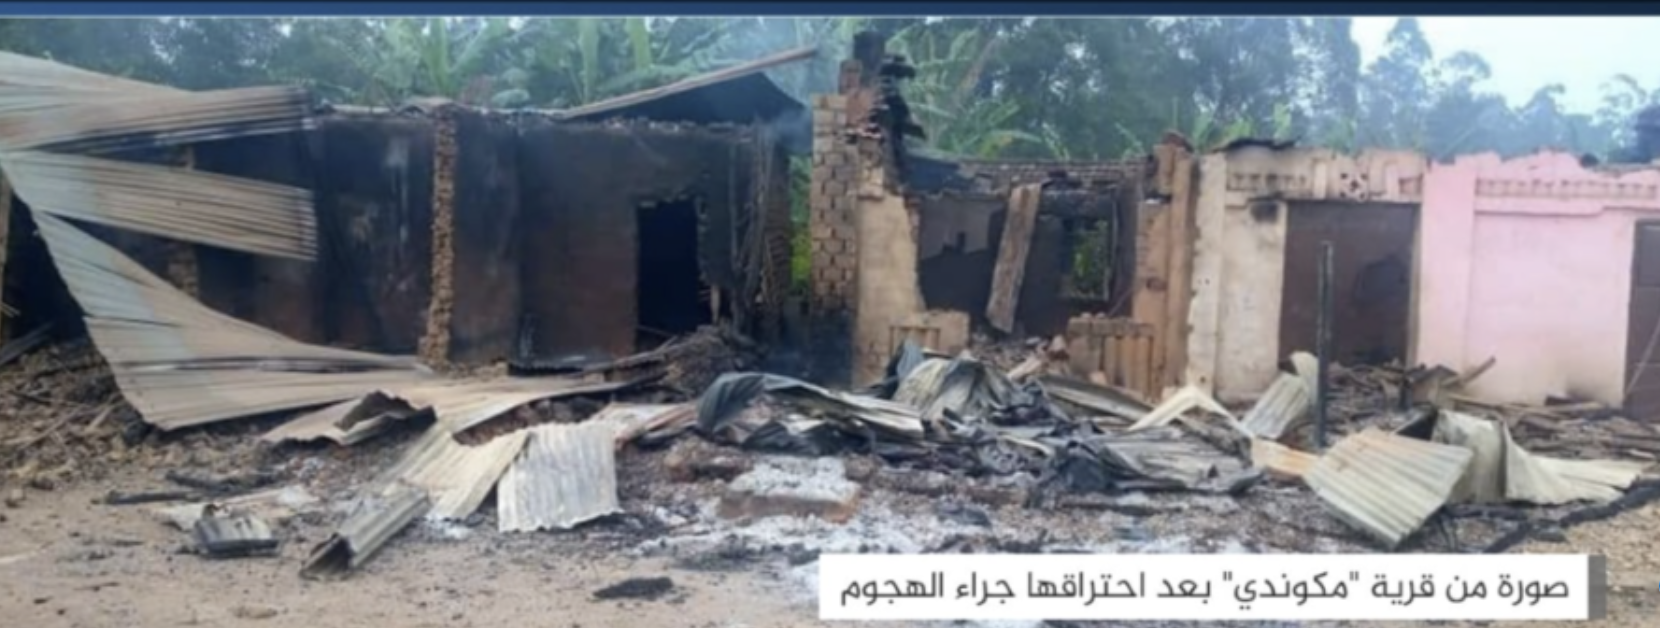 Islamic State's Amaq News Agency Claim of Credit: More than 35 Christians were killed in a bloody attack by Islamic State militants in the province of "Beni" in eastern Congo Congo - North Kivu - Amaq Agency: More than 35 Christians were killed in a bloody attack targeting one of their villages in the province of "North Kivu" in eastern Congo. Security sources told "Amaq" agency that the Islamic State fighters stormed last Wednesday evening the Christian village of "Mkundi" located on the "Butembo-Beni" road. The sources added that the fighters targeted Christian gatherings inside the village simultaneously with firearms and knives, which resulted in at least 35 deaths and the injury of others. The sources pointed out that the fighters burned the homes and properties of the Christians inside the village and seized some of them before they left to return to their positions.